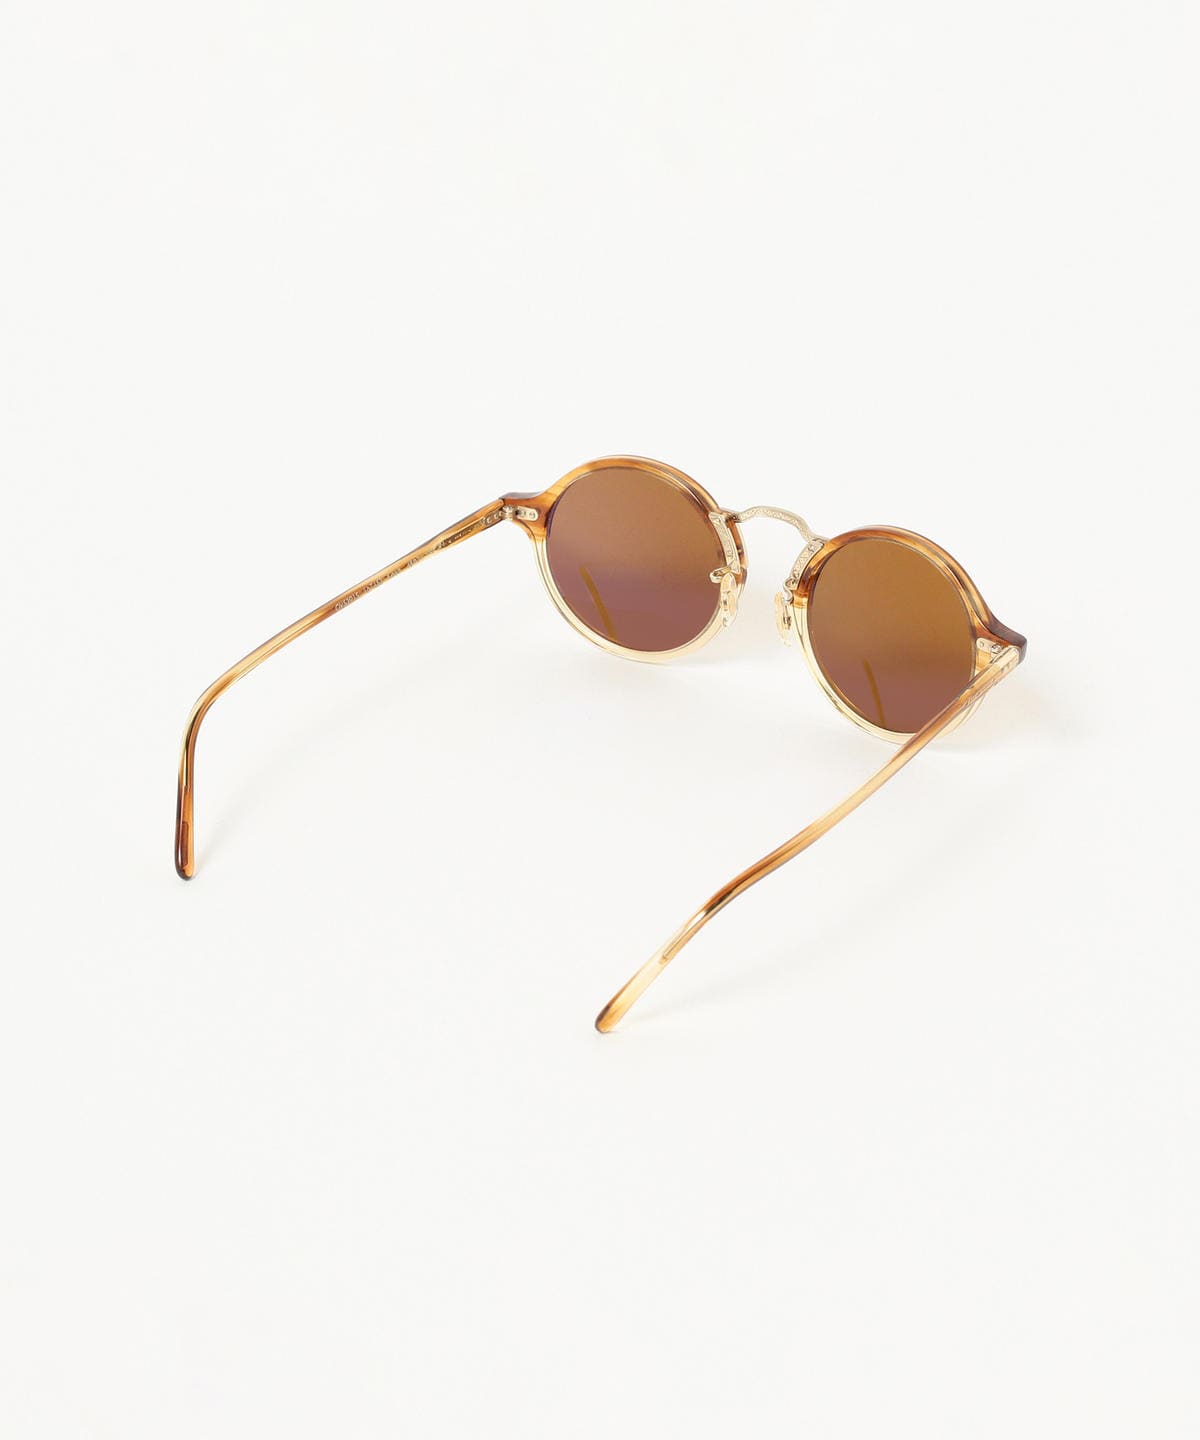 Demi-Luxe BEAMS（デミルクス ビームス）OLIVER PEOPLES 